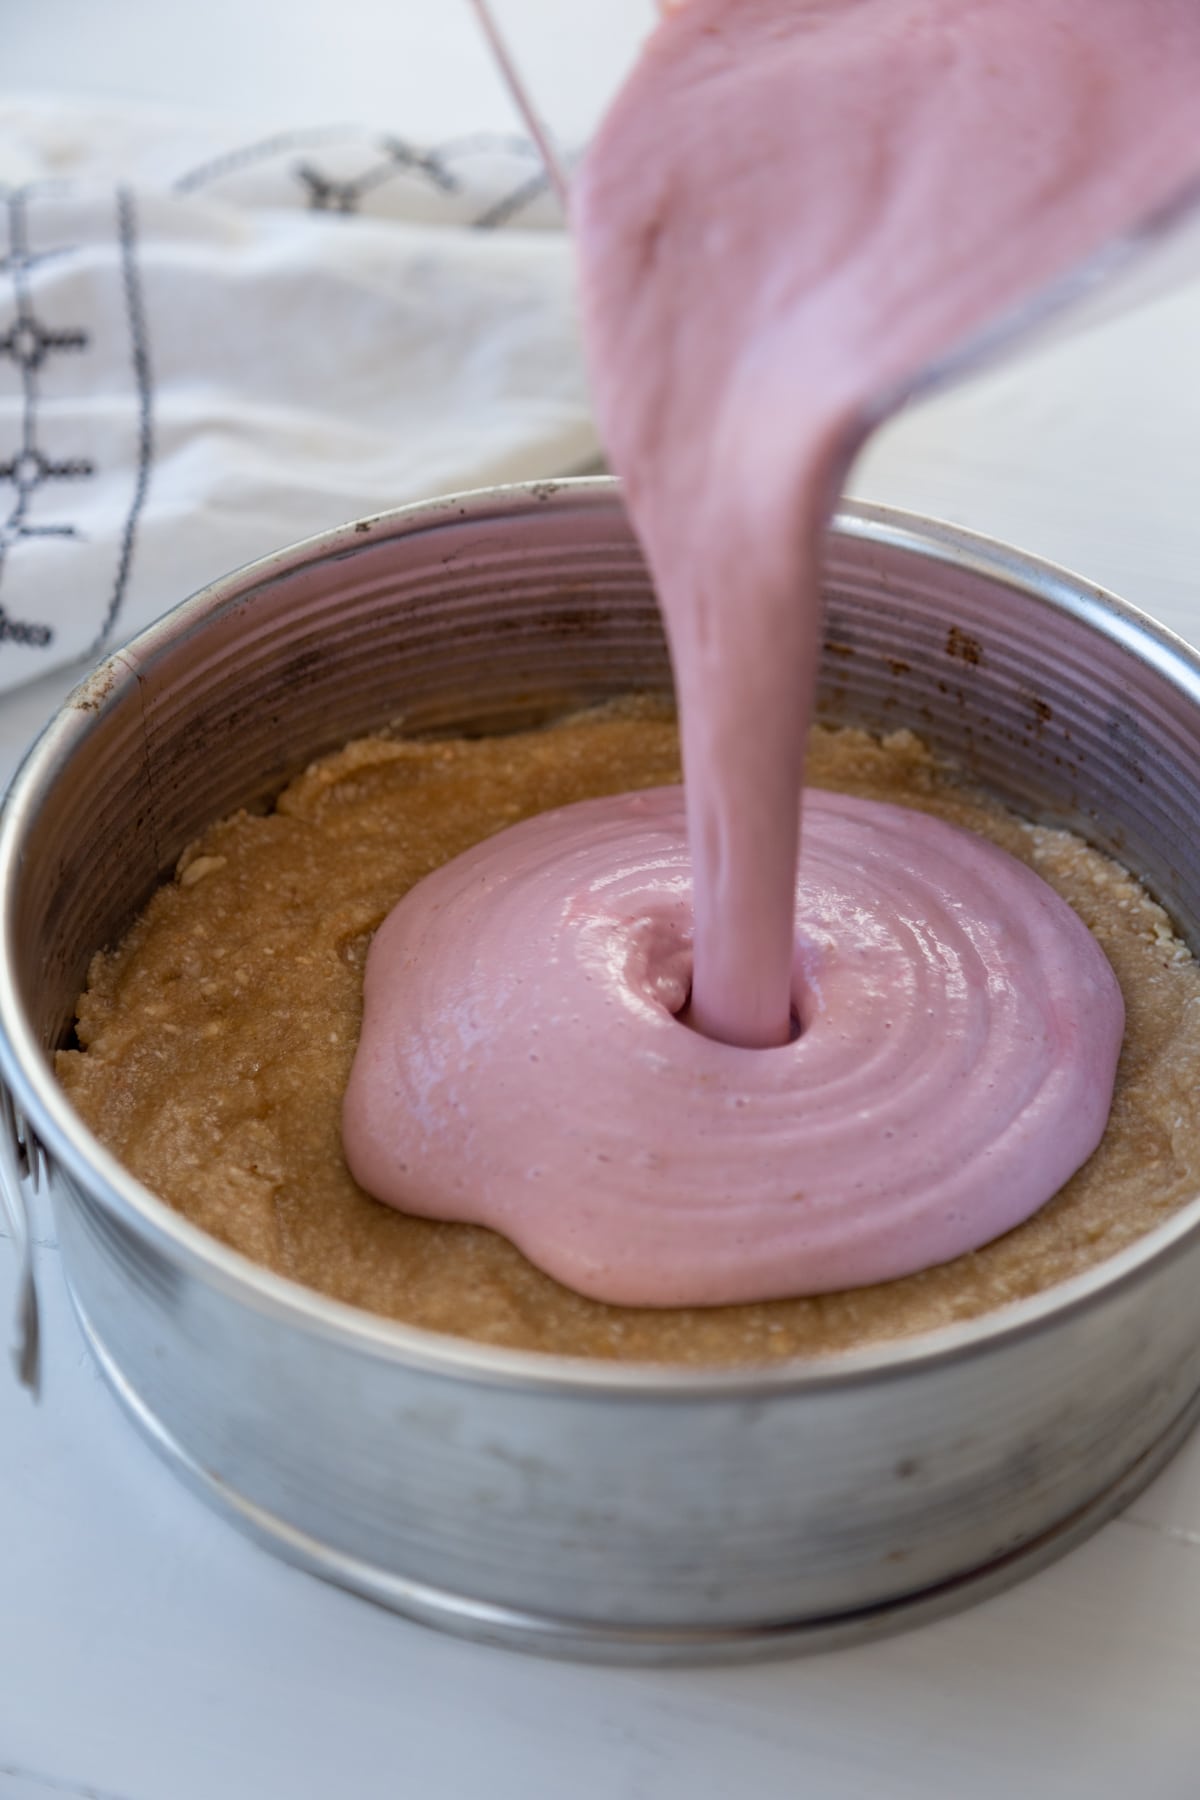 Raspberry cheesecake filling being poured into a springform pan with a nut crust on the bottom.